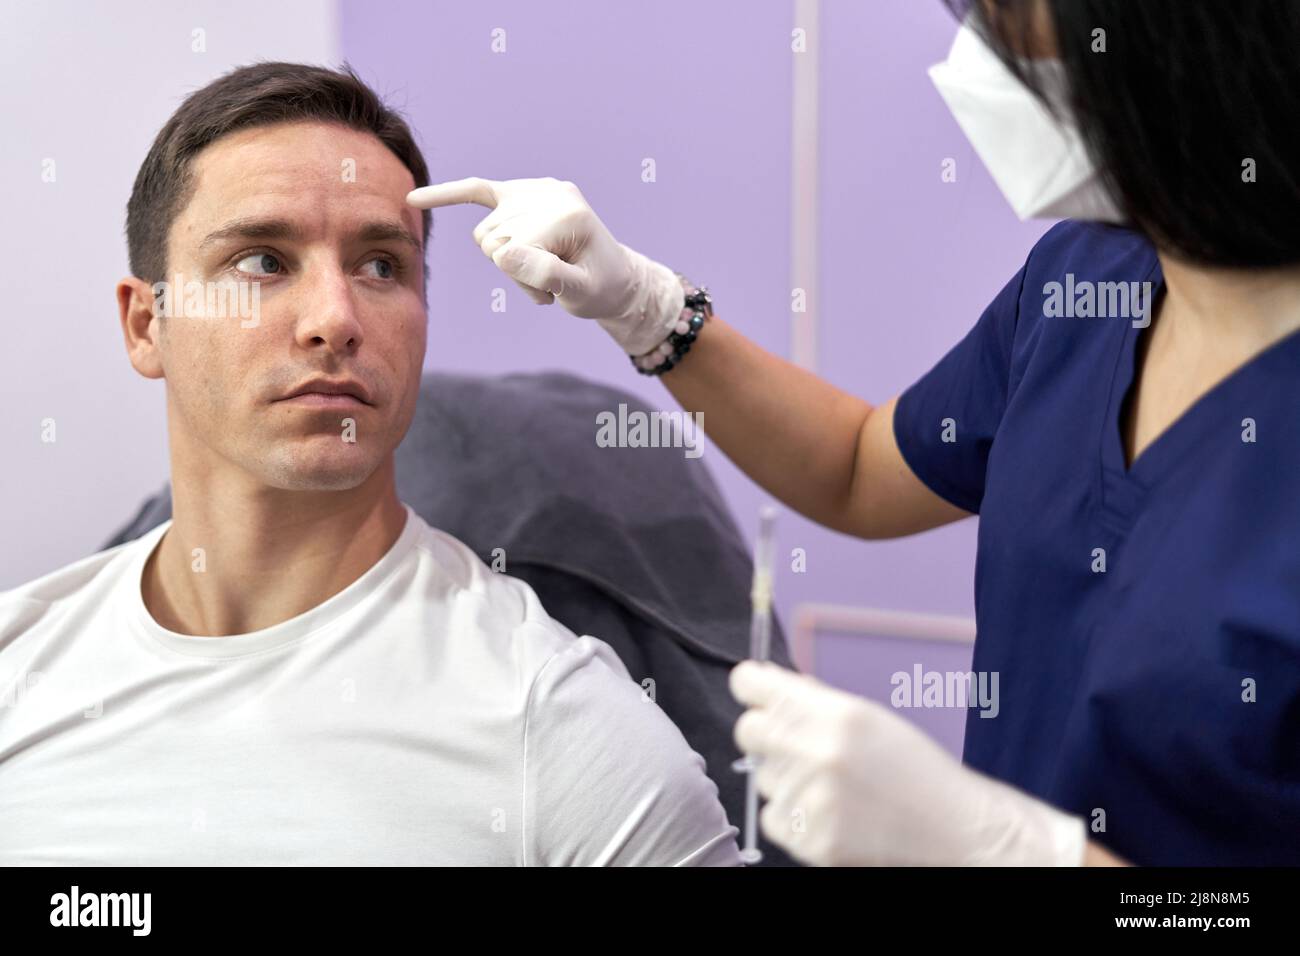 Doctor pointing to the spot she will inject a botox injection into a patient Stock Photo